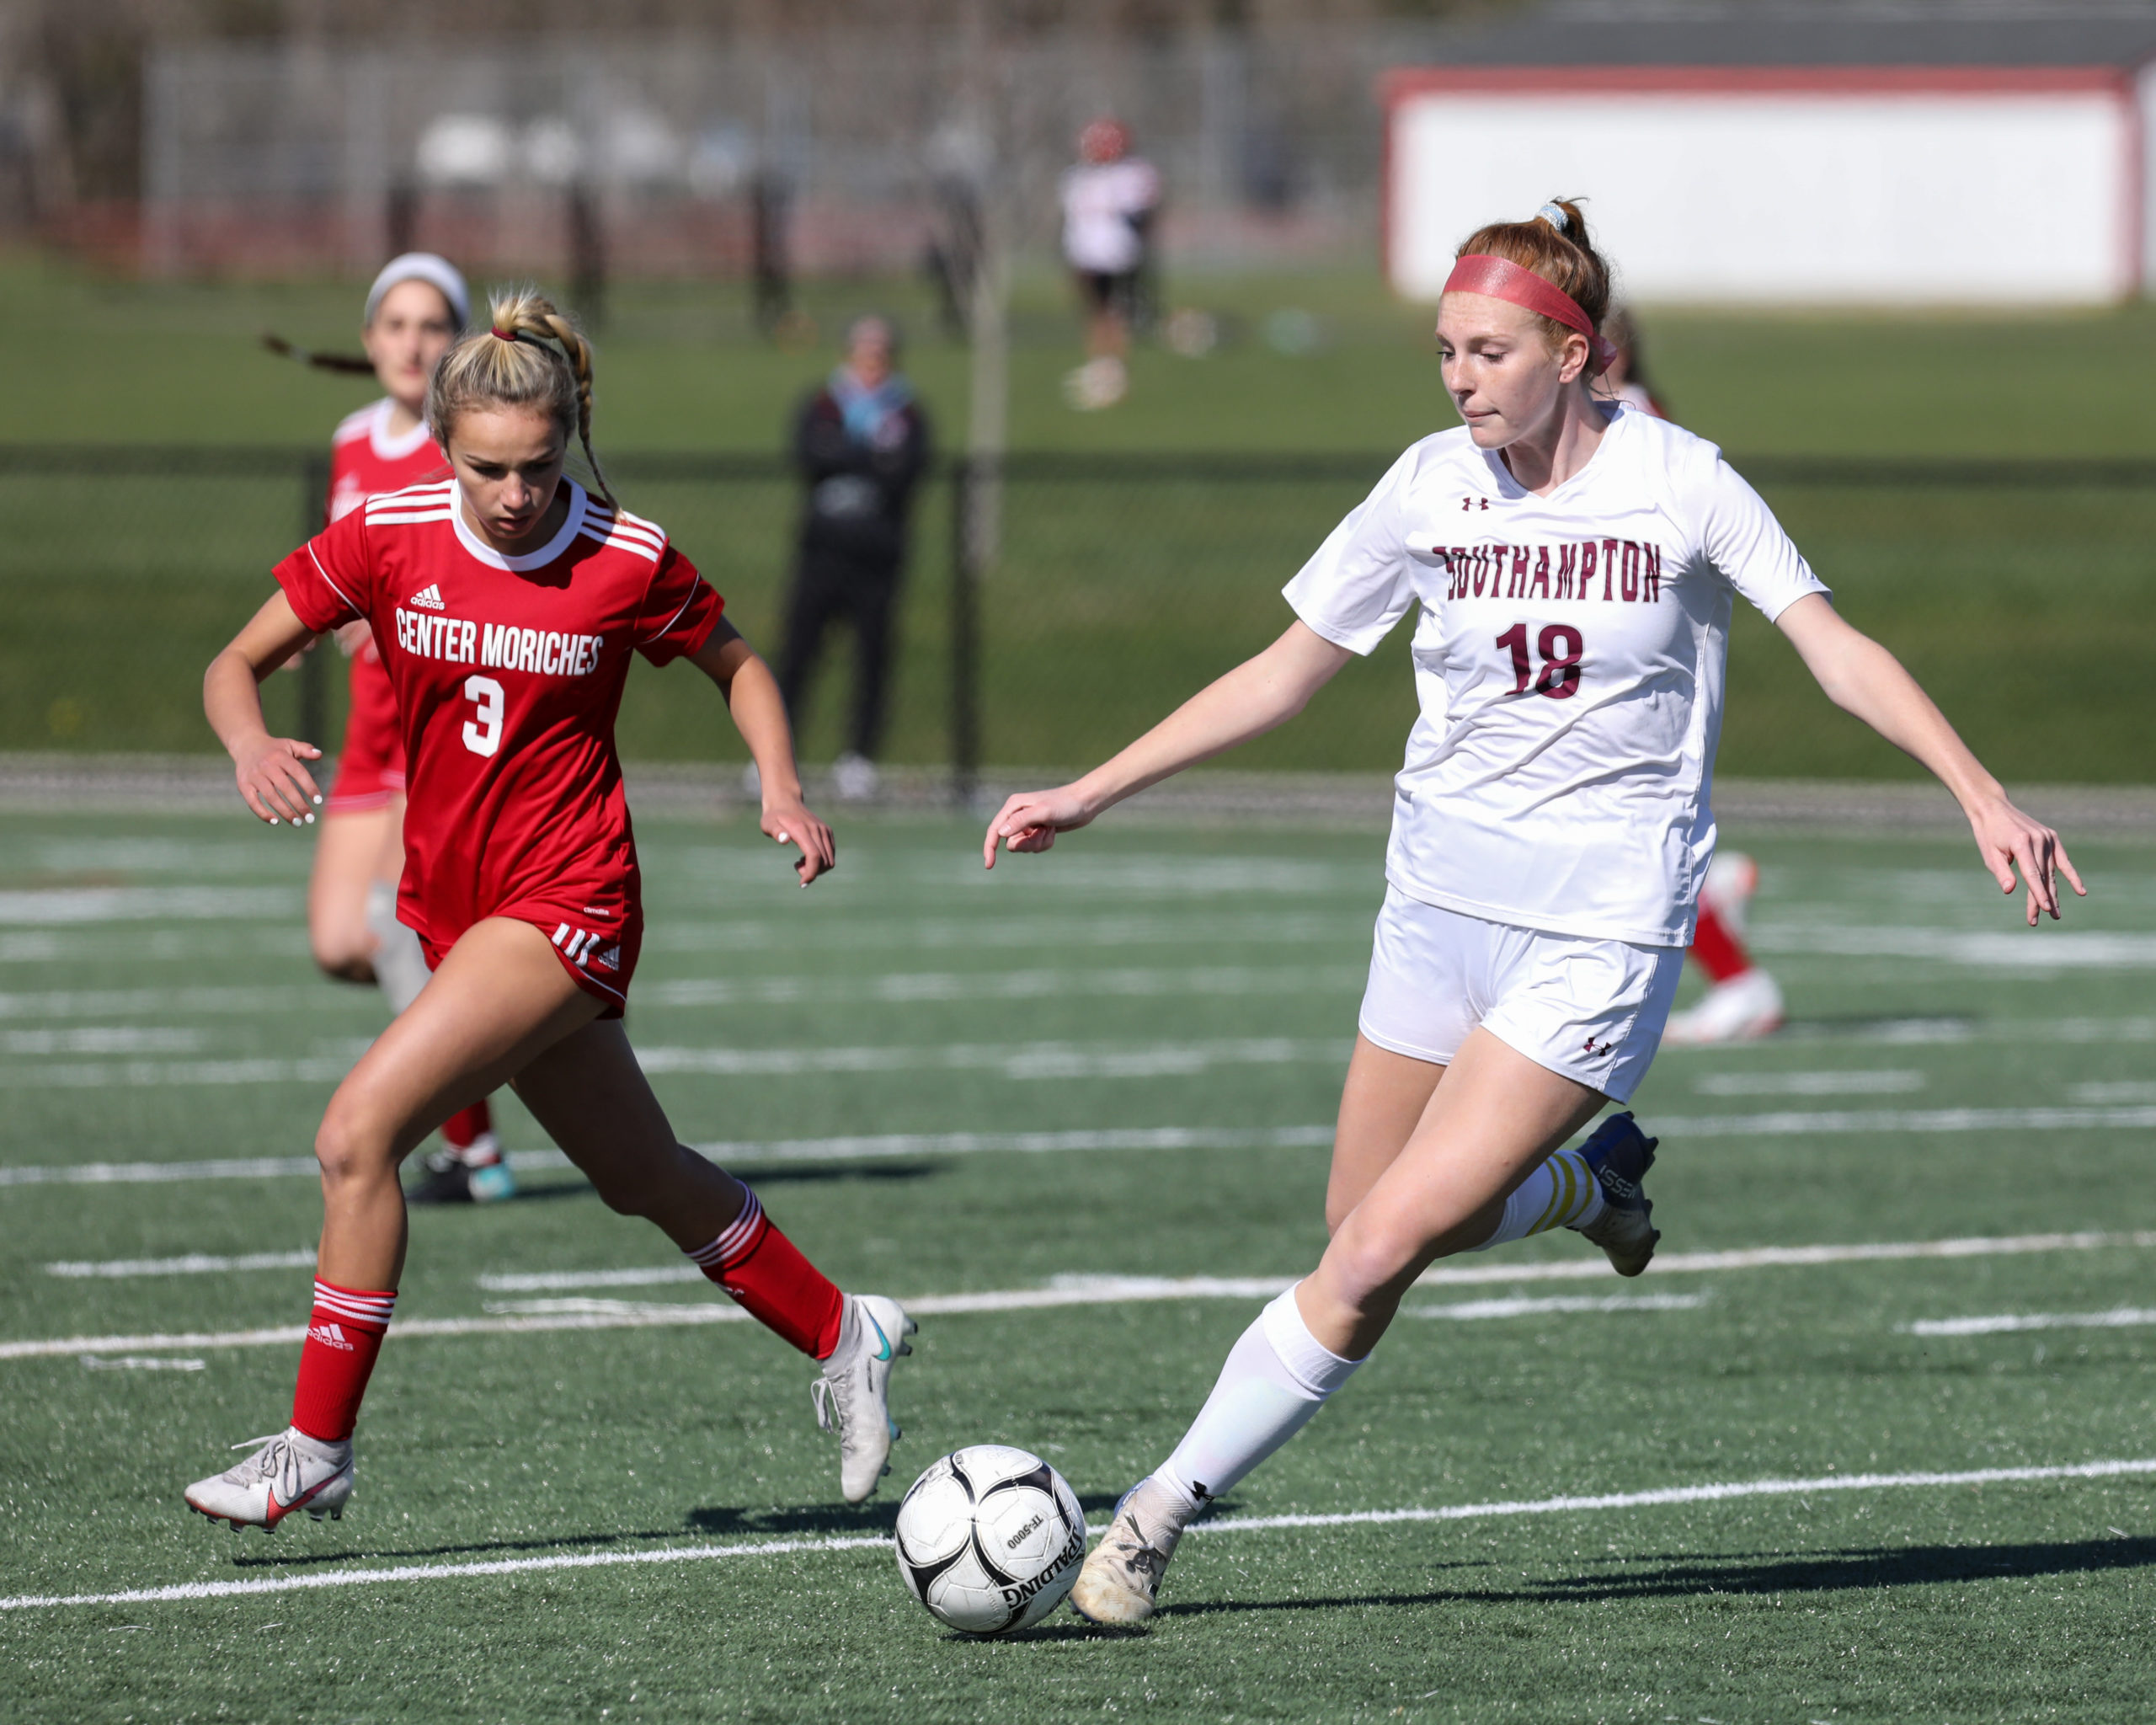 Southampton's Carli Cameron was one of two girls soccer players named All-County.